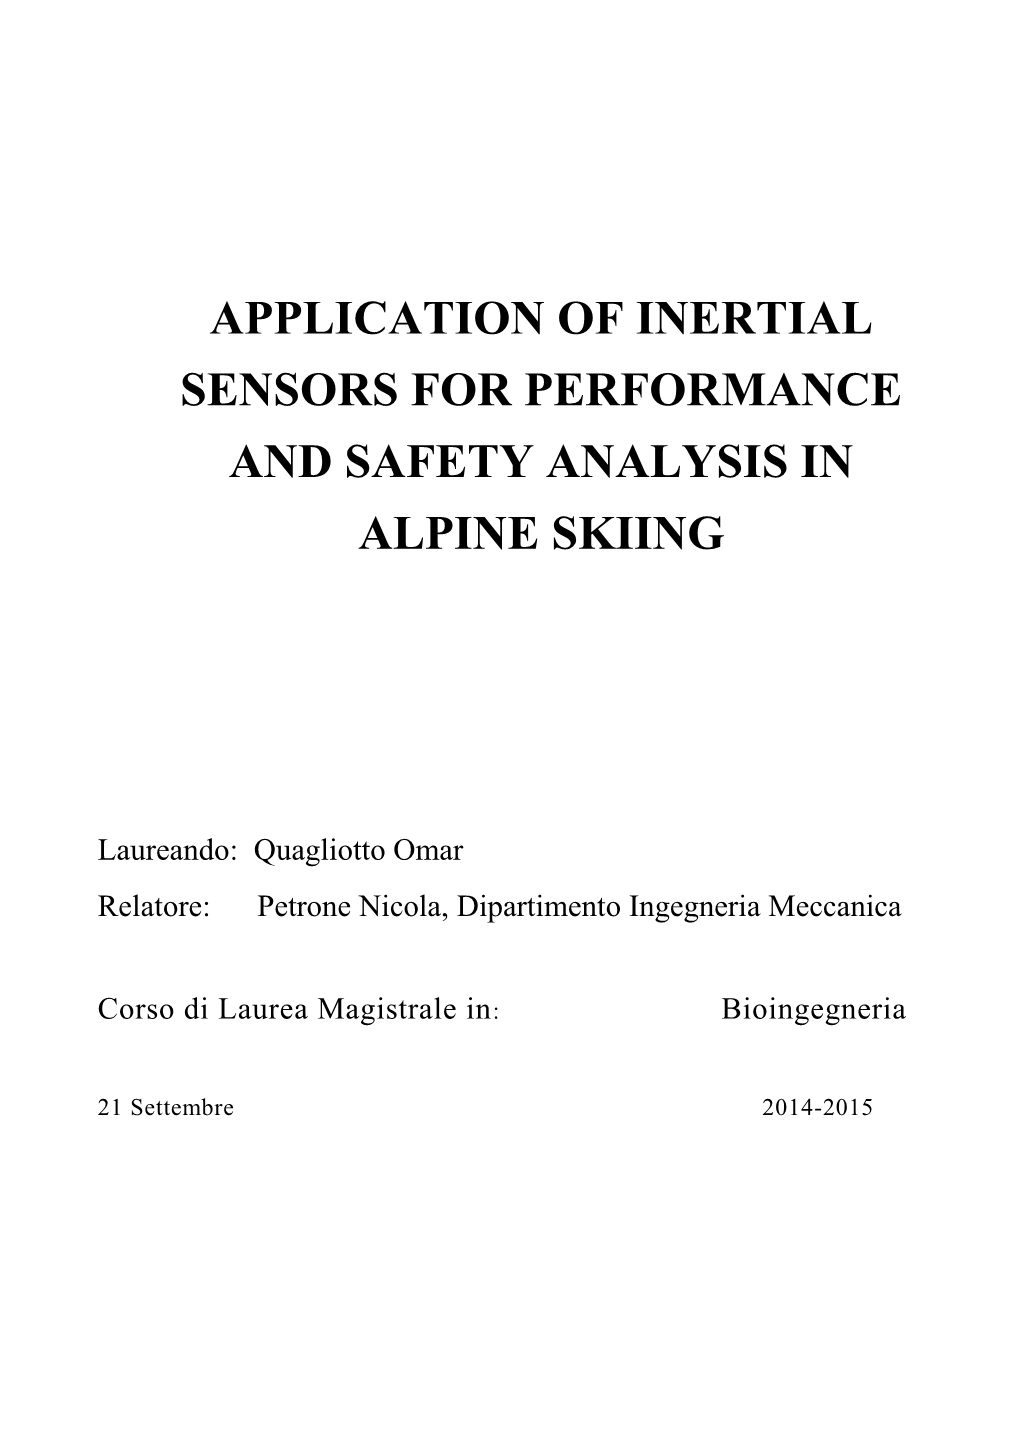 Application of Inertial Sensor for Performance and Safety Analysis In